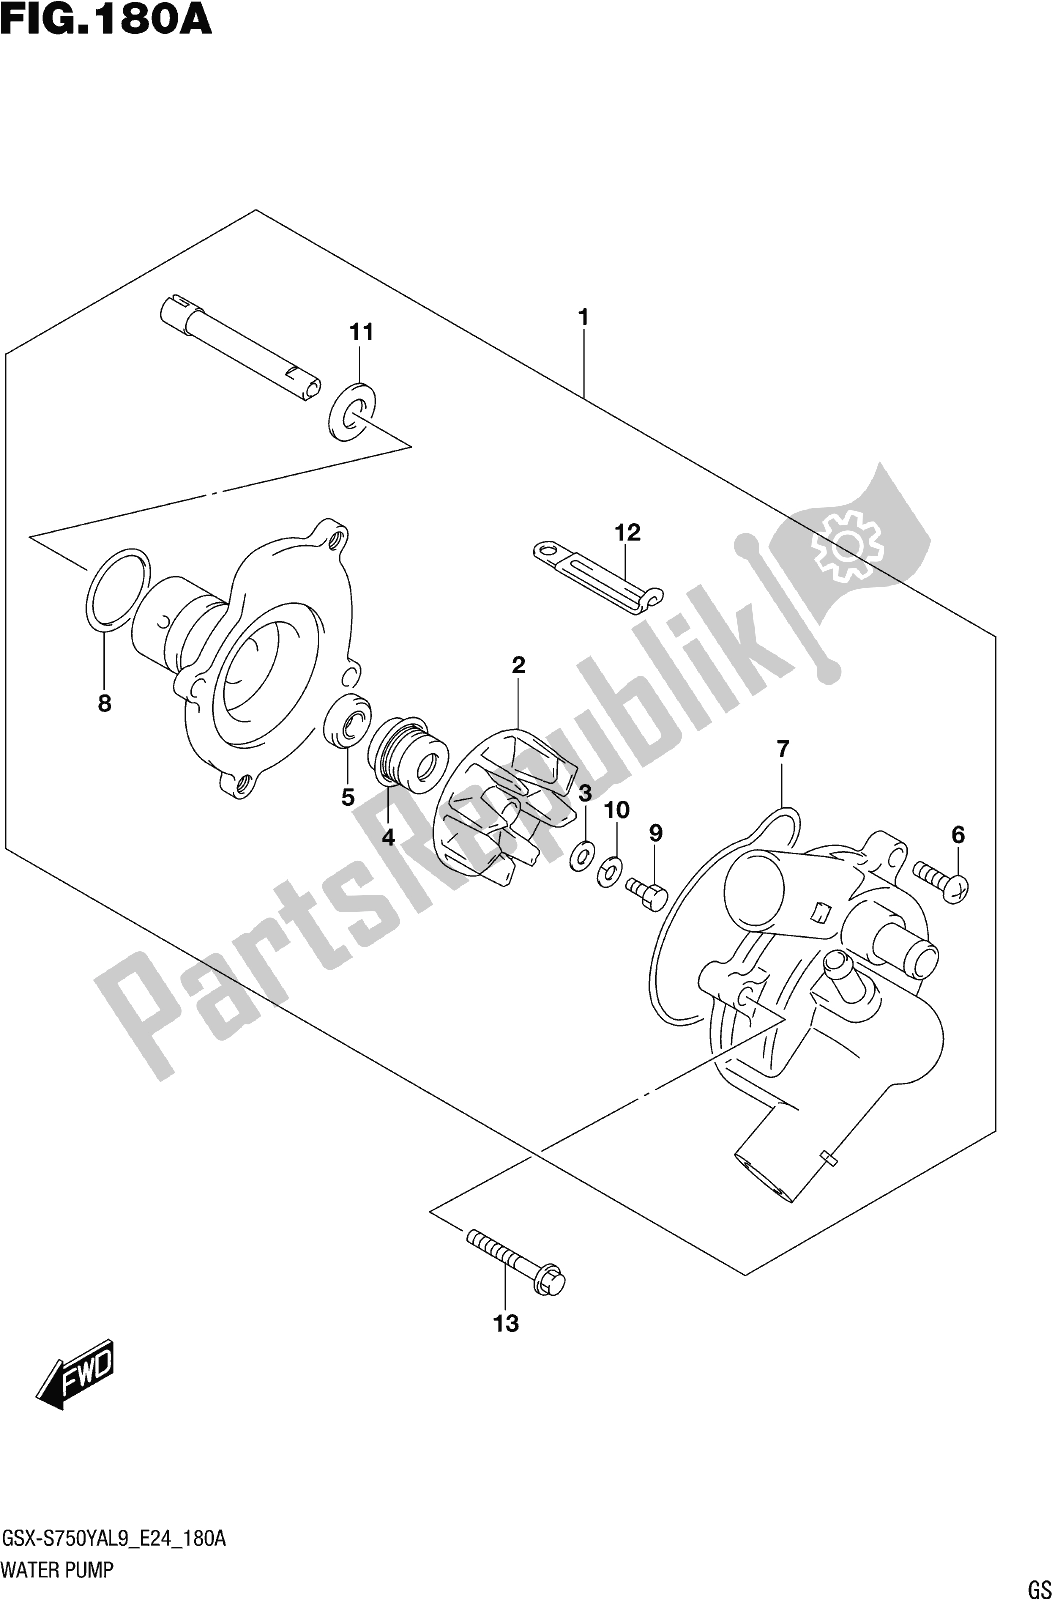 All parts for the Fig. 180a Water Pump of the Suzuki Gsx-s 750 YA 2019